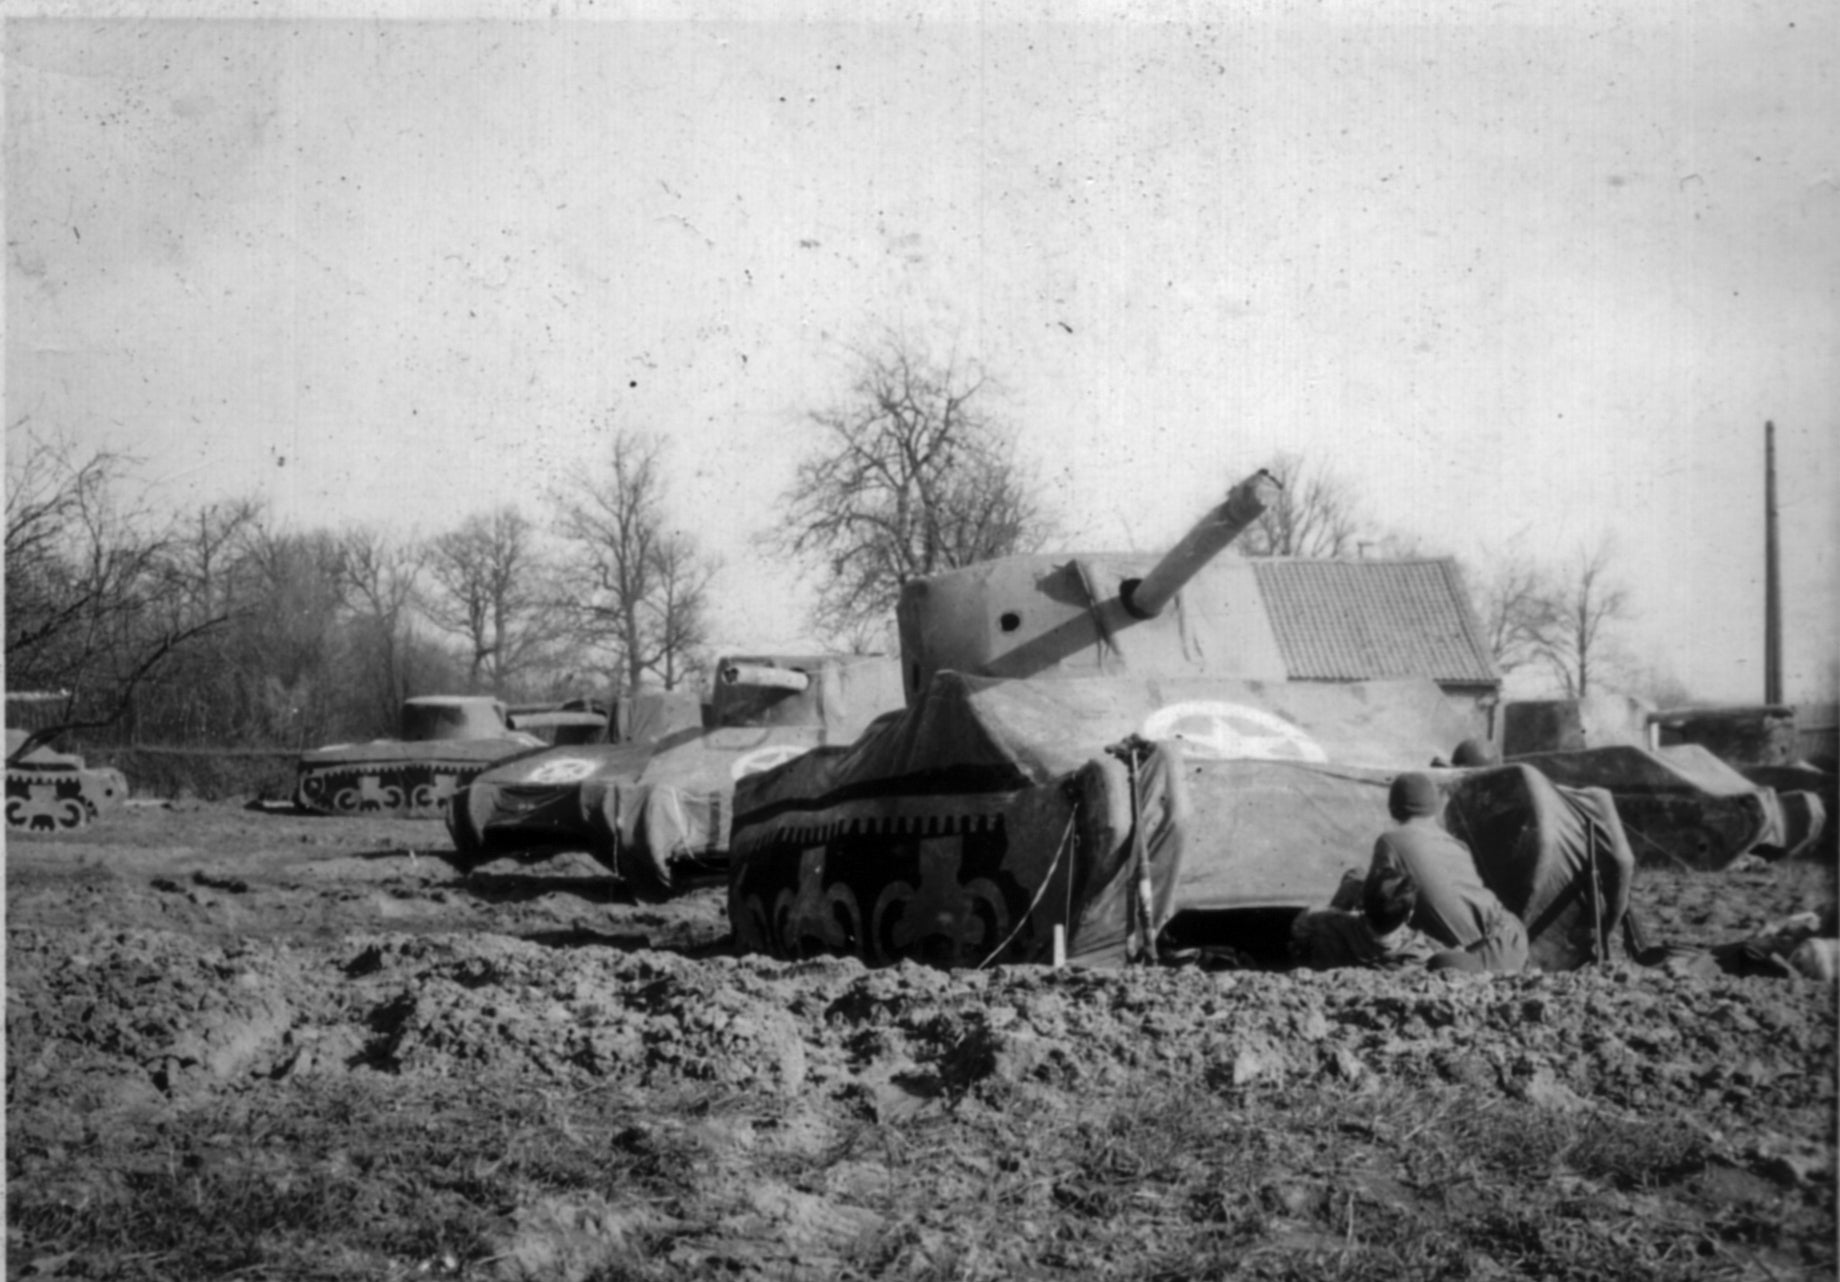 This photo provided by the Ghost Army Legacy Project shows inflatable tanks in March, 1945